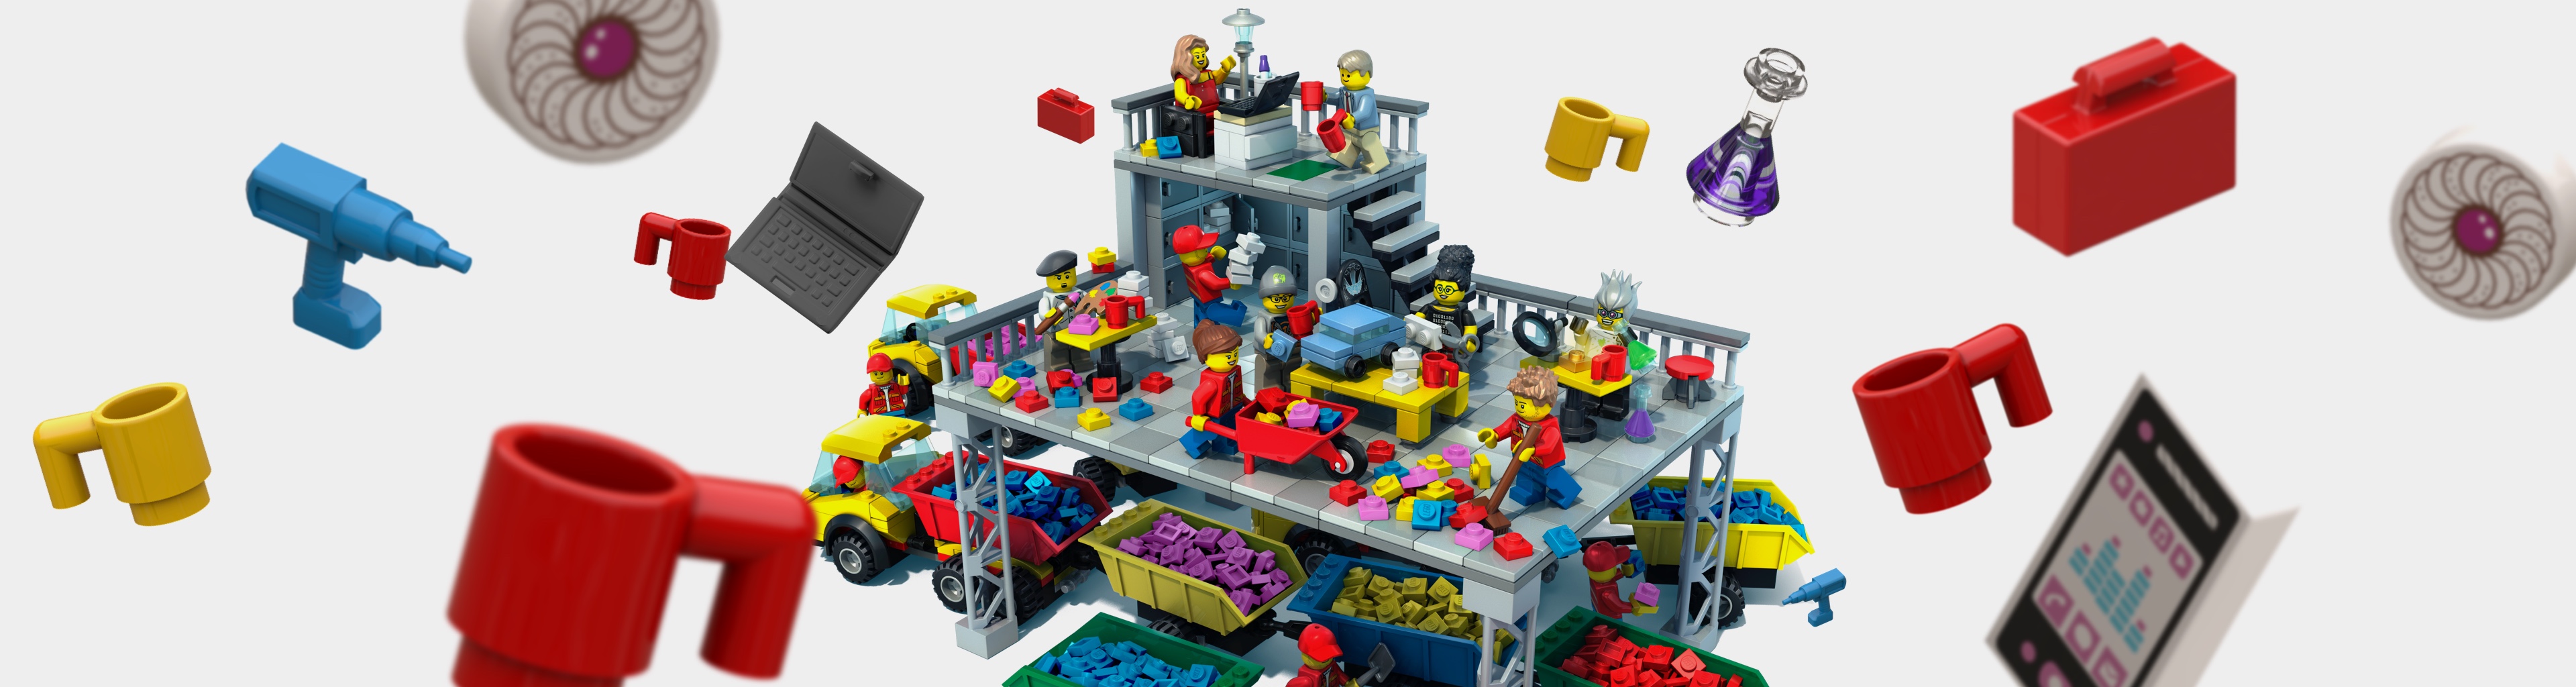 people building with legos